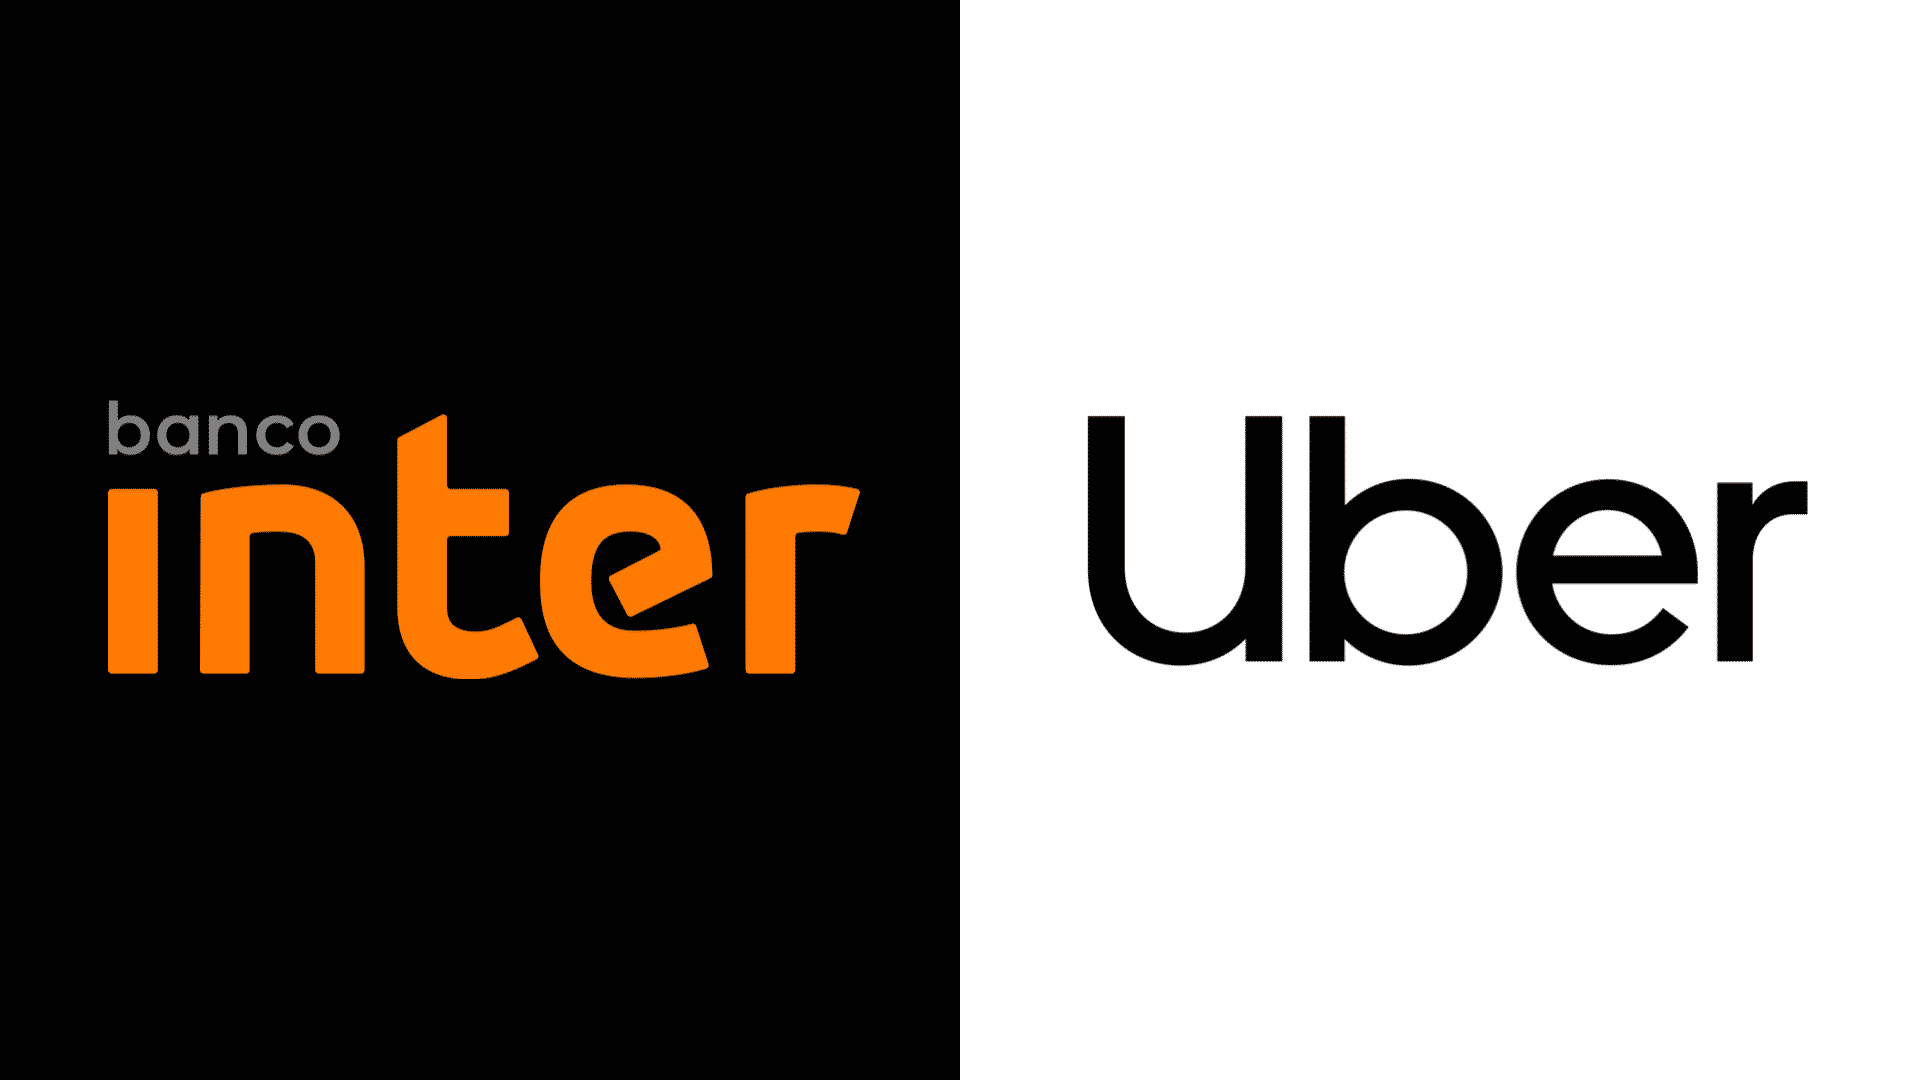 Banco Inter of Brazil Looking for Financial Services Partnership with Uber